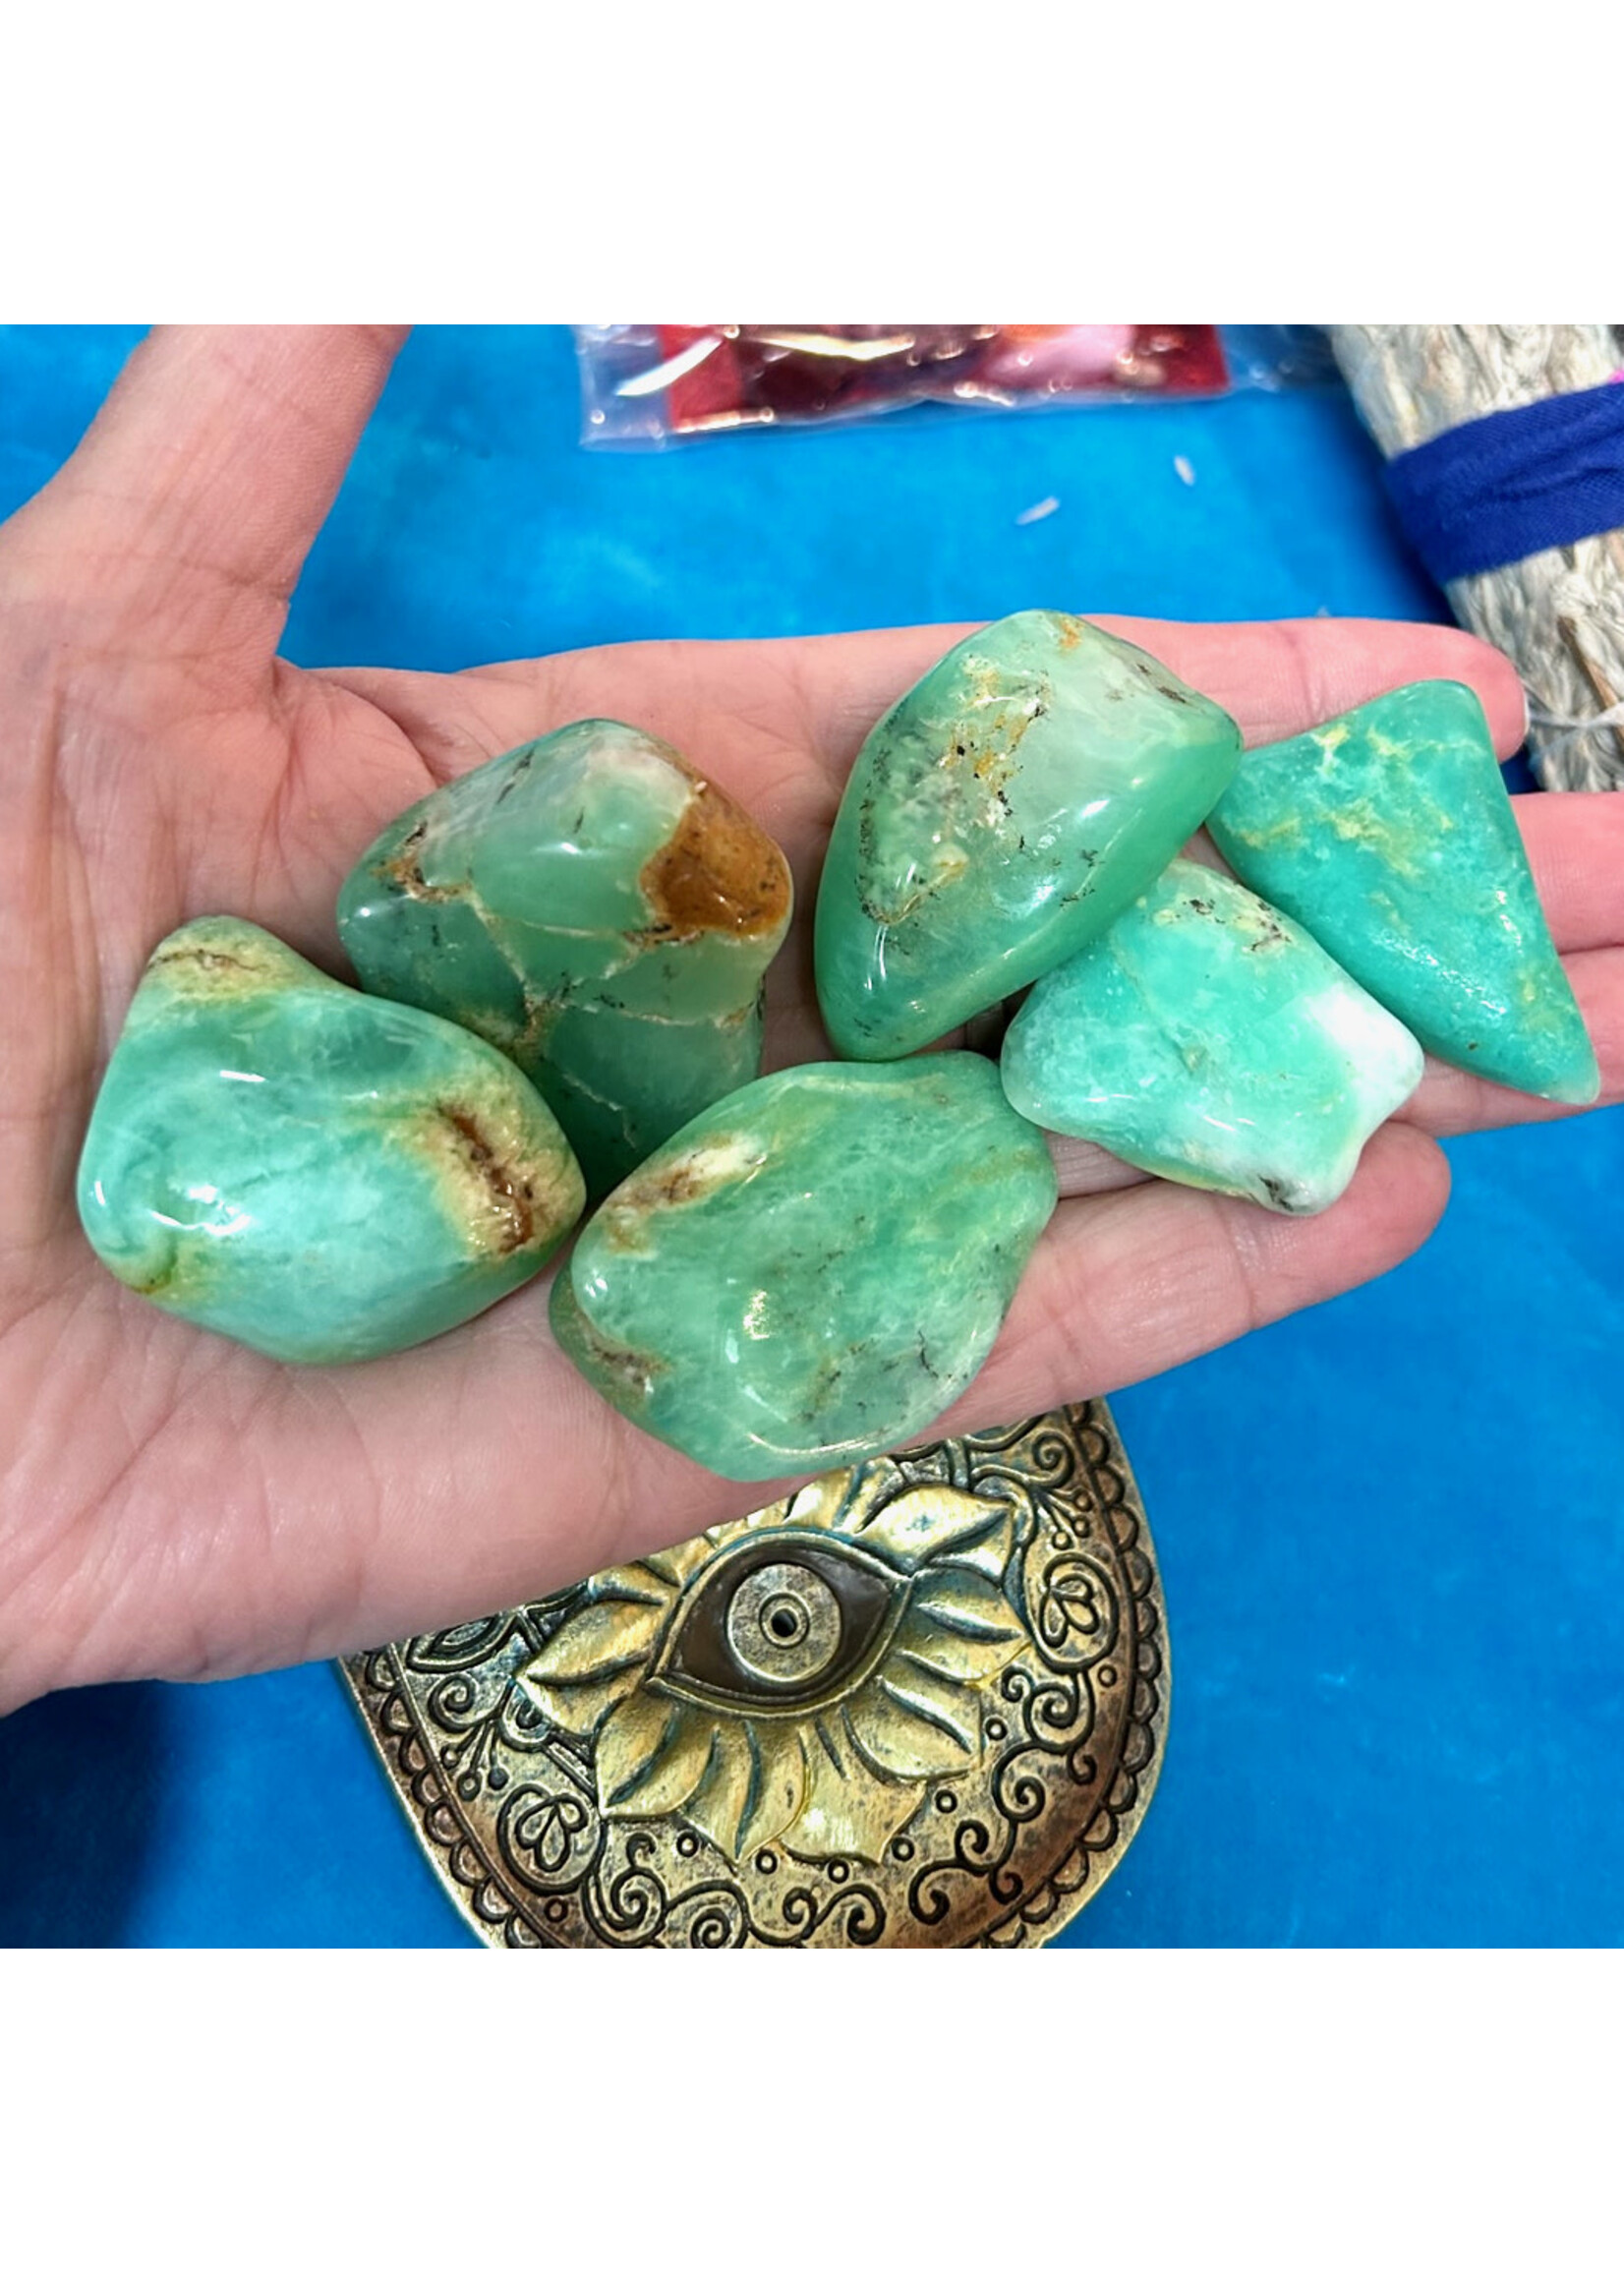 Chrysoprase Grade AA Polished for compassion